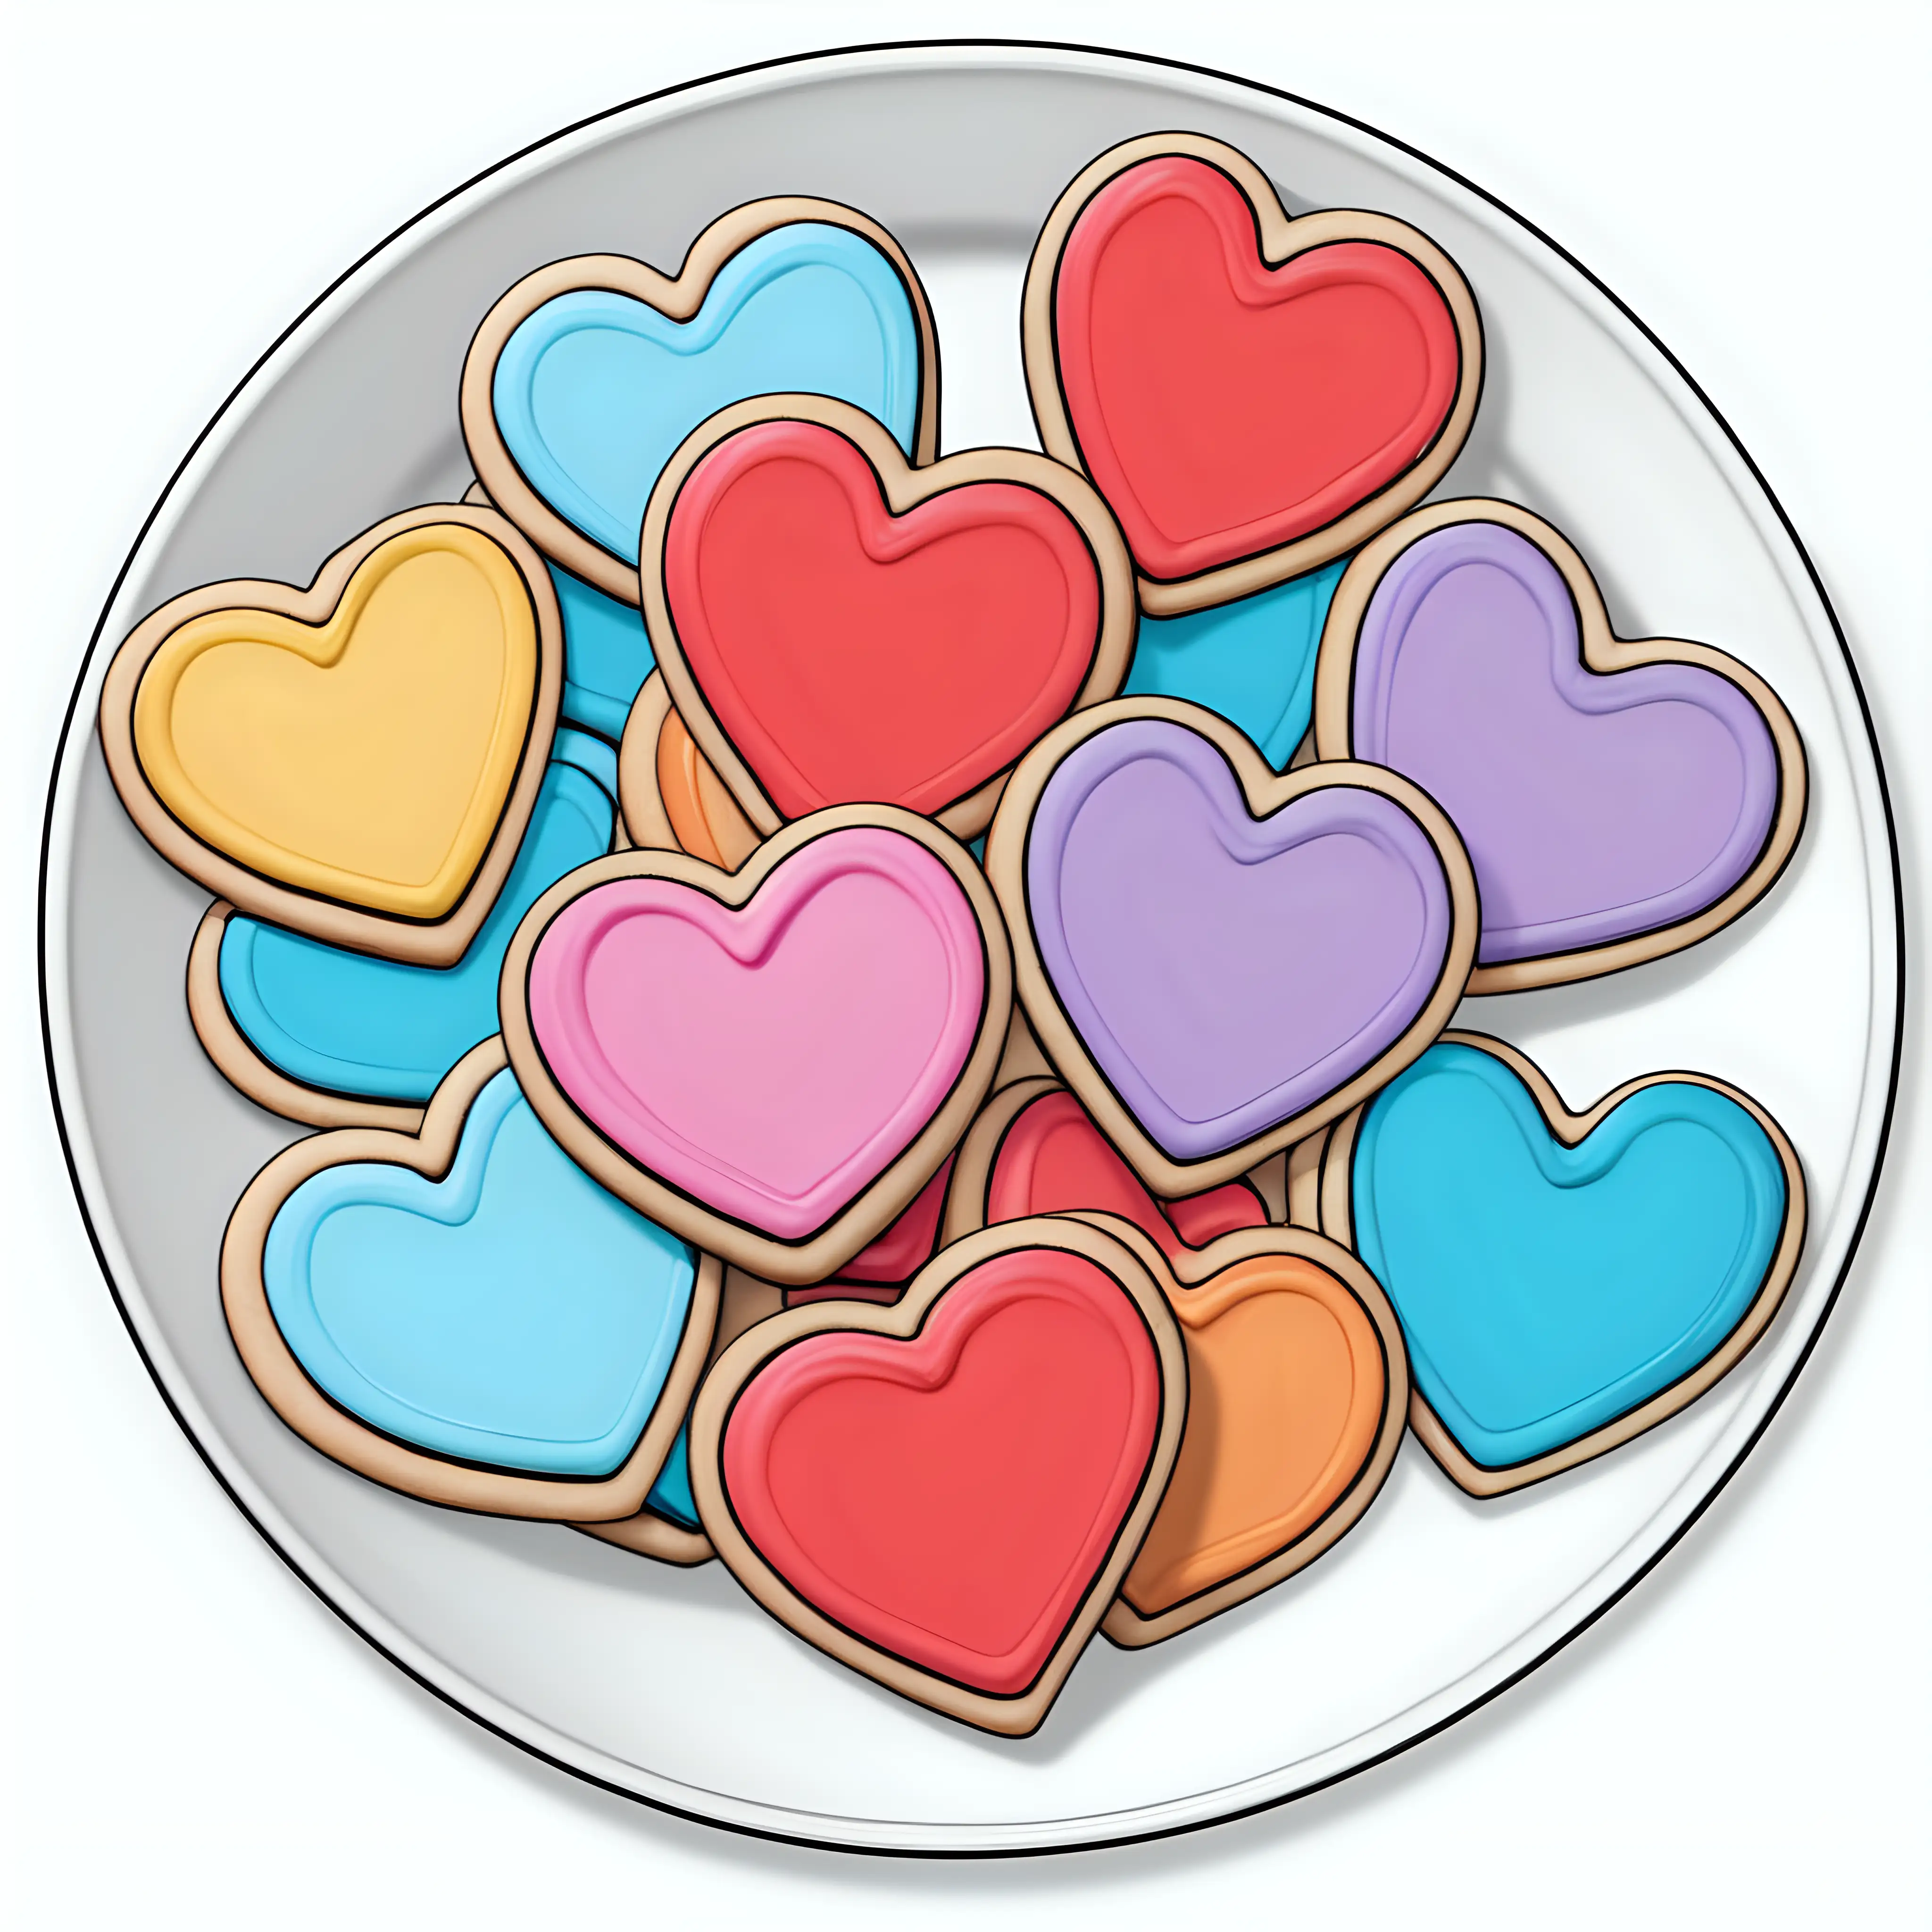 HeartShaped Cookie Decorating Fun and Easy Coloring Activity